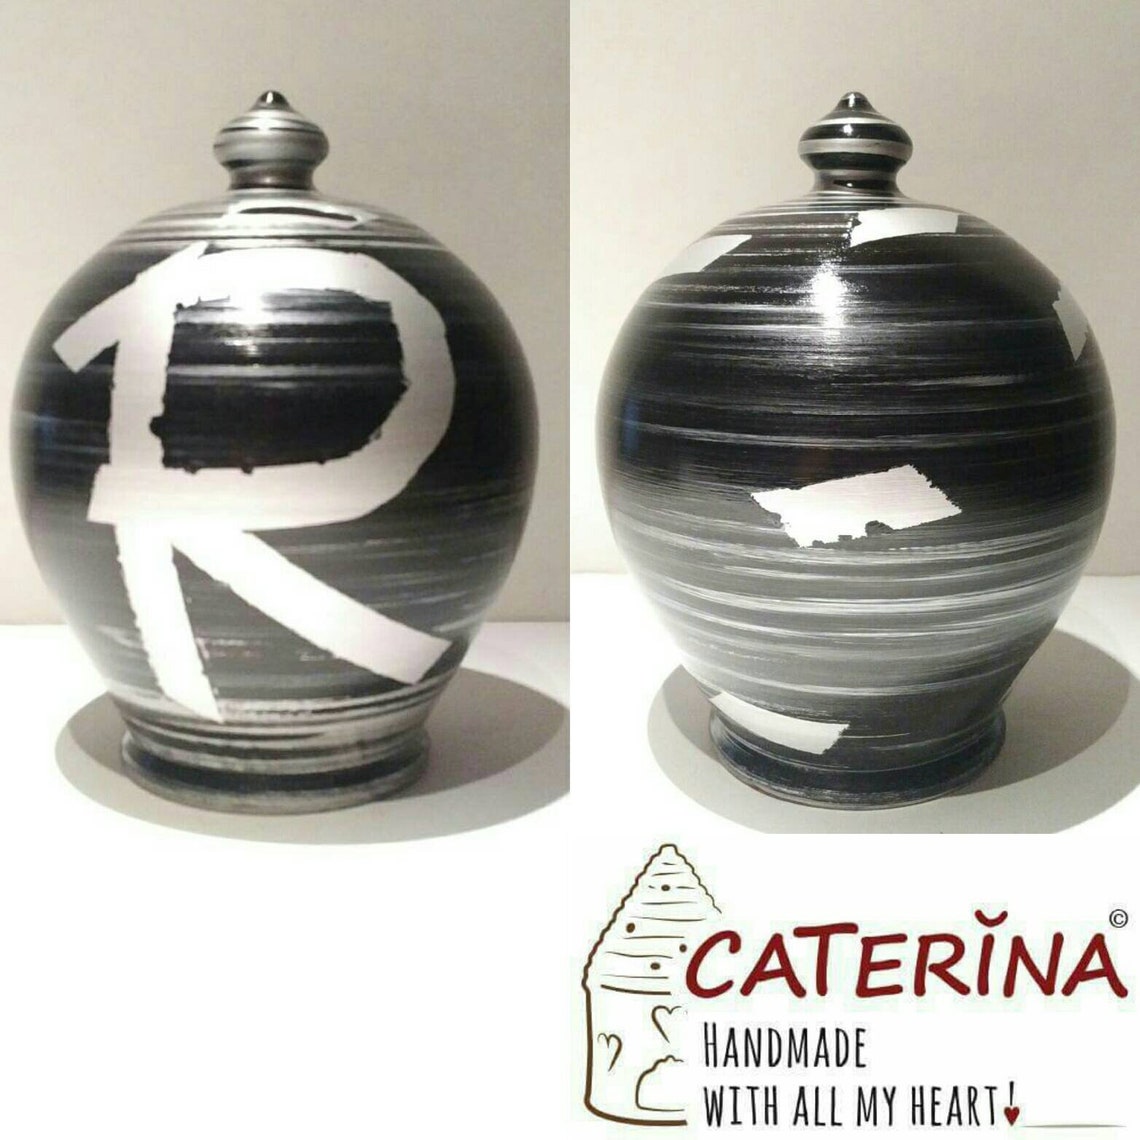 Looking for a personalized coin bank for that special someone? We welcome custom orders! We will hand draw your initials and/or hand paint your piggy bank with colors of your choice. A great gift idea for both women and men!  💰 Size: 30 cm = 11,811 Inches. Circumference: 72 cm = 28,3 inches.  Colors: Silver and Black, as in picture.  With hole and stopper plug, or without hole.